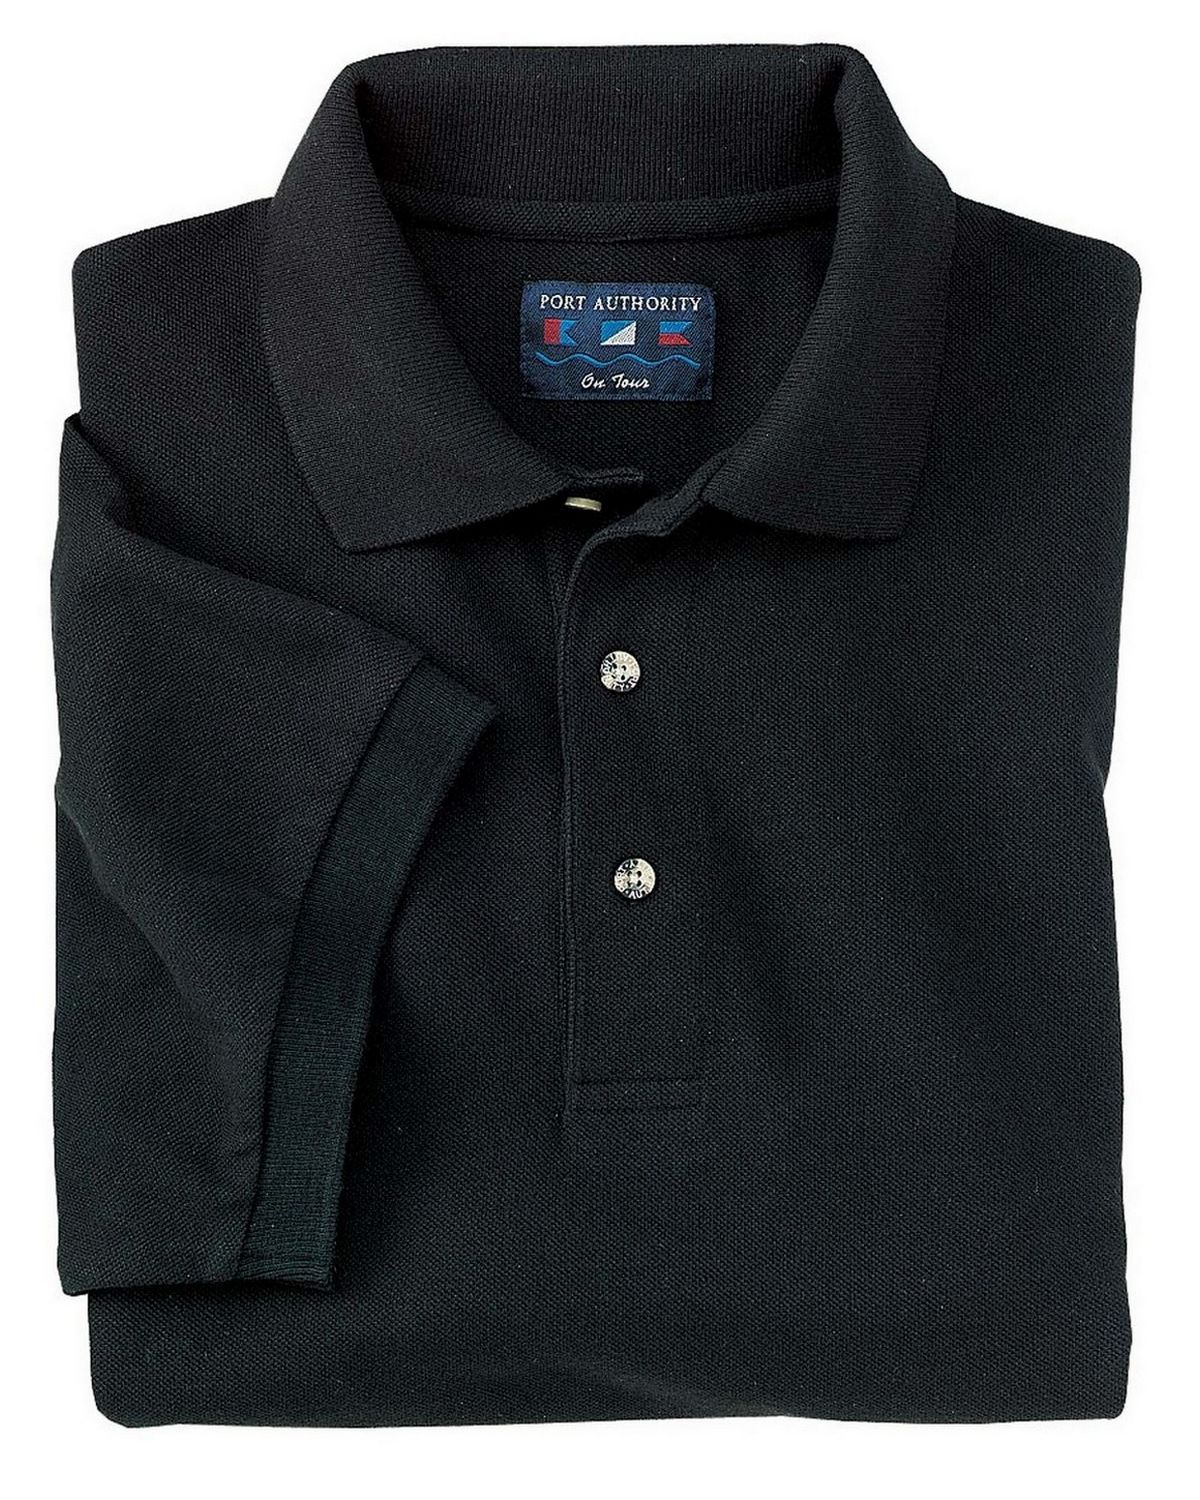 Port Authority Tall Pique Knit Polo TLK420 